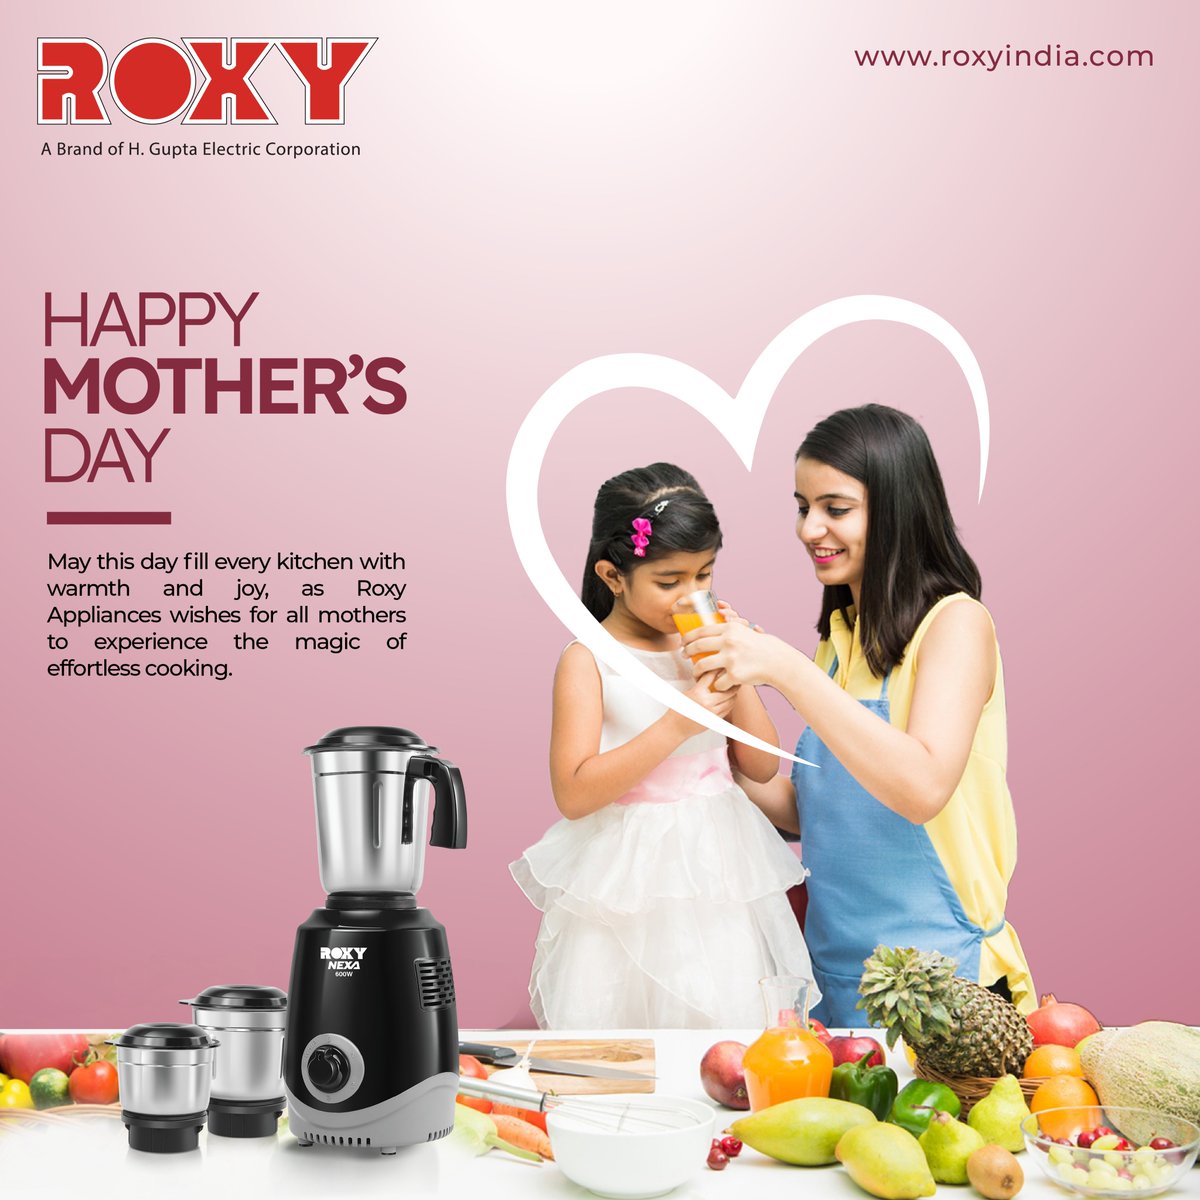 This Mother's Day, let Roxy Home Appliances be her ultimate sidekick, easing every task and adding joy to her moments of rest. Celebrate Mom with the gift of convenience and relaxation. 💖 . . . . For more visit:- roxyindia.com . . . . #MothersDay #Roxy